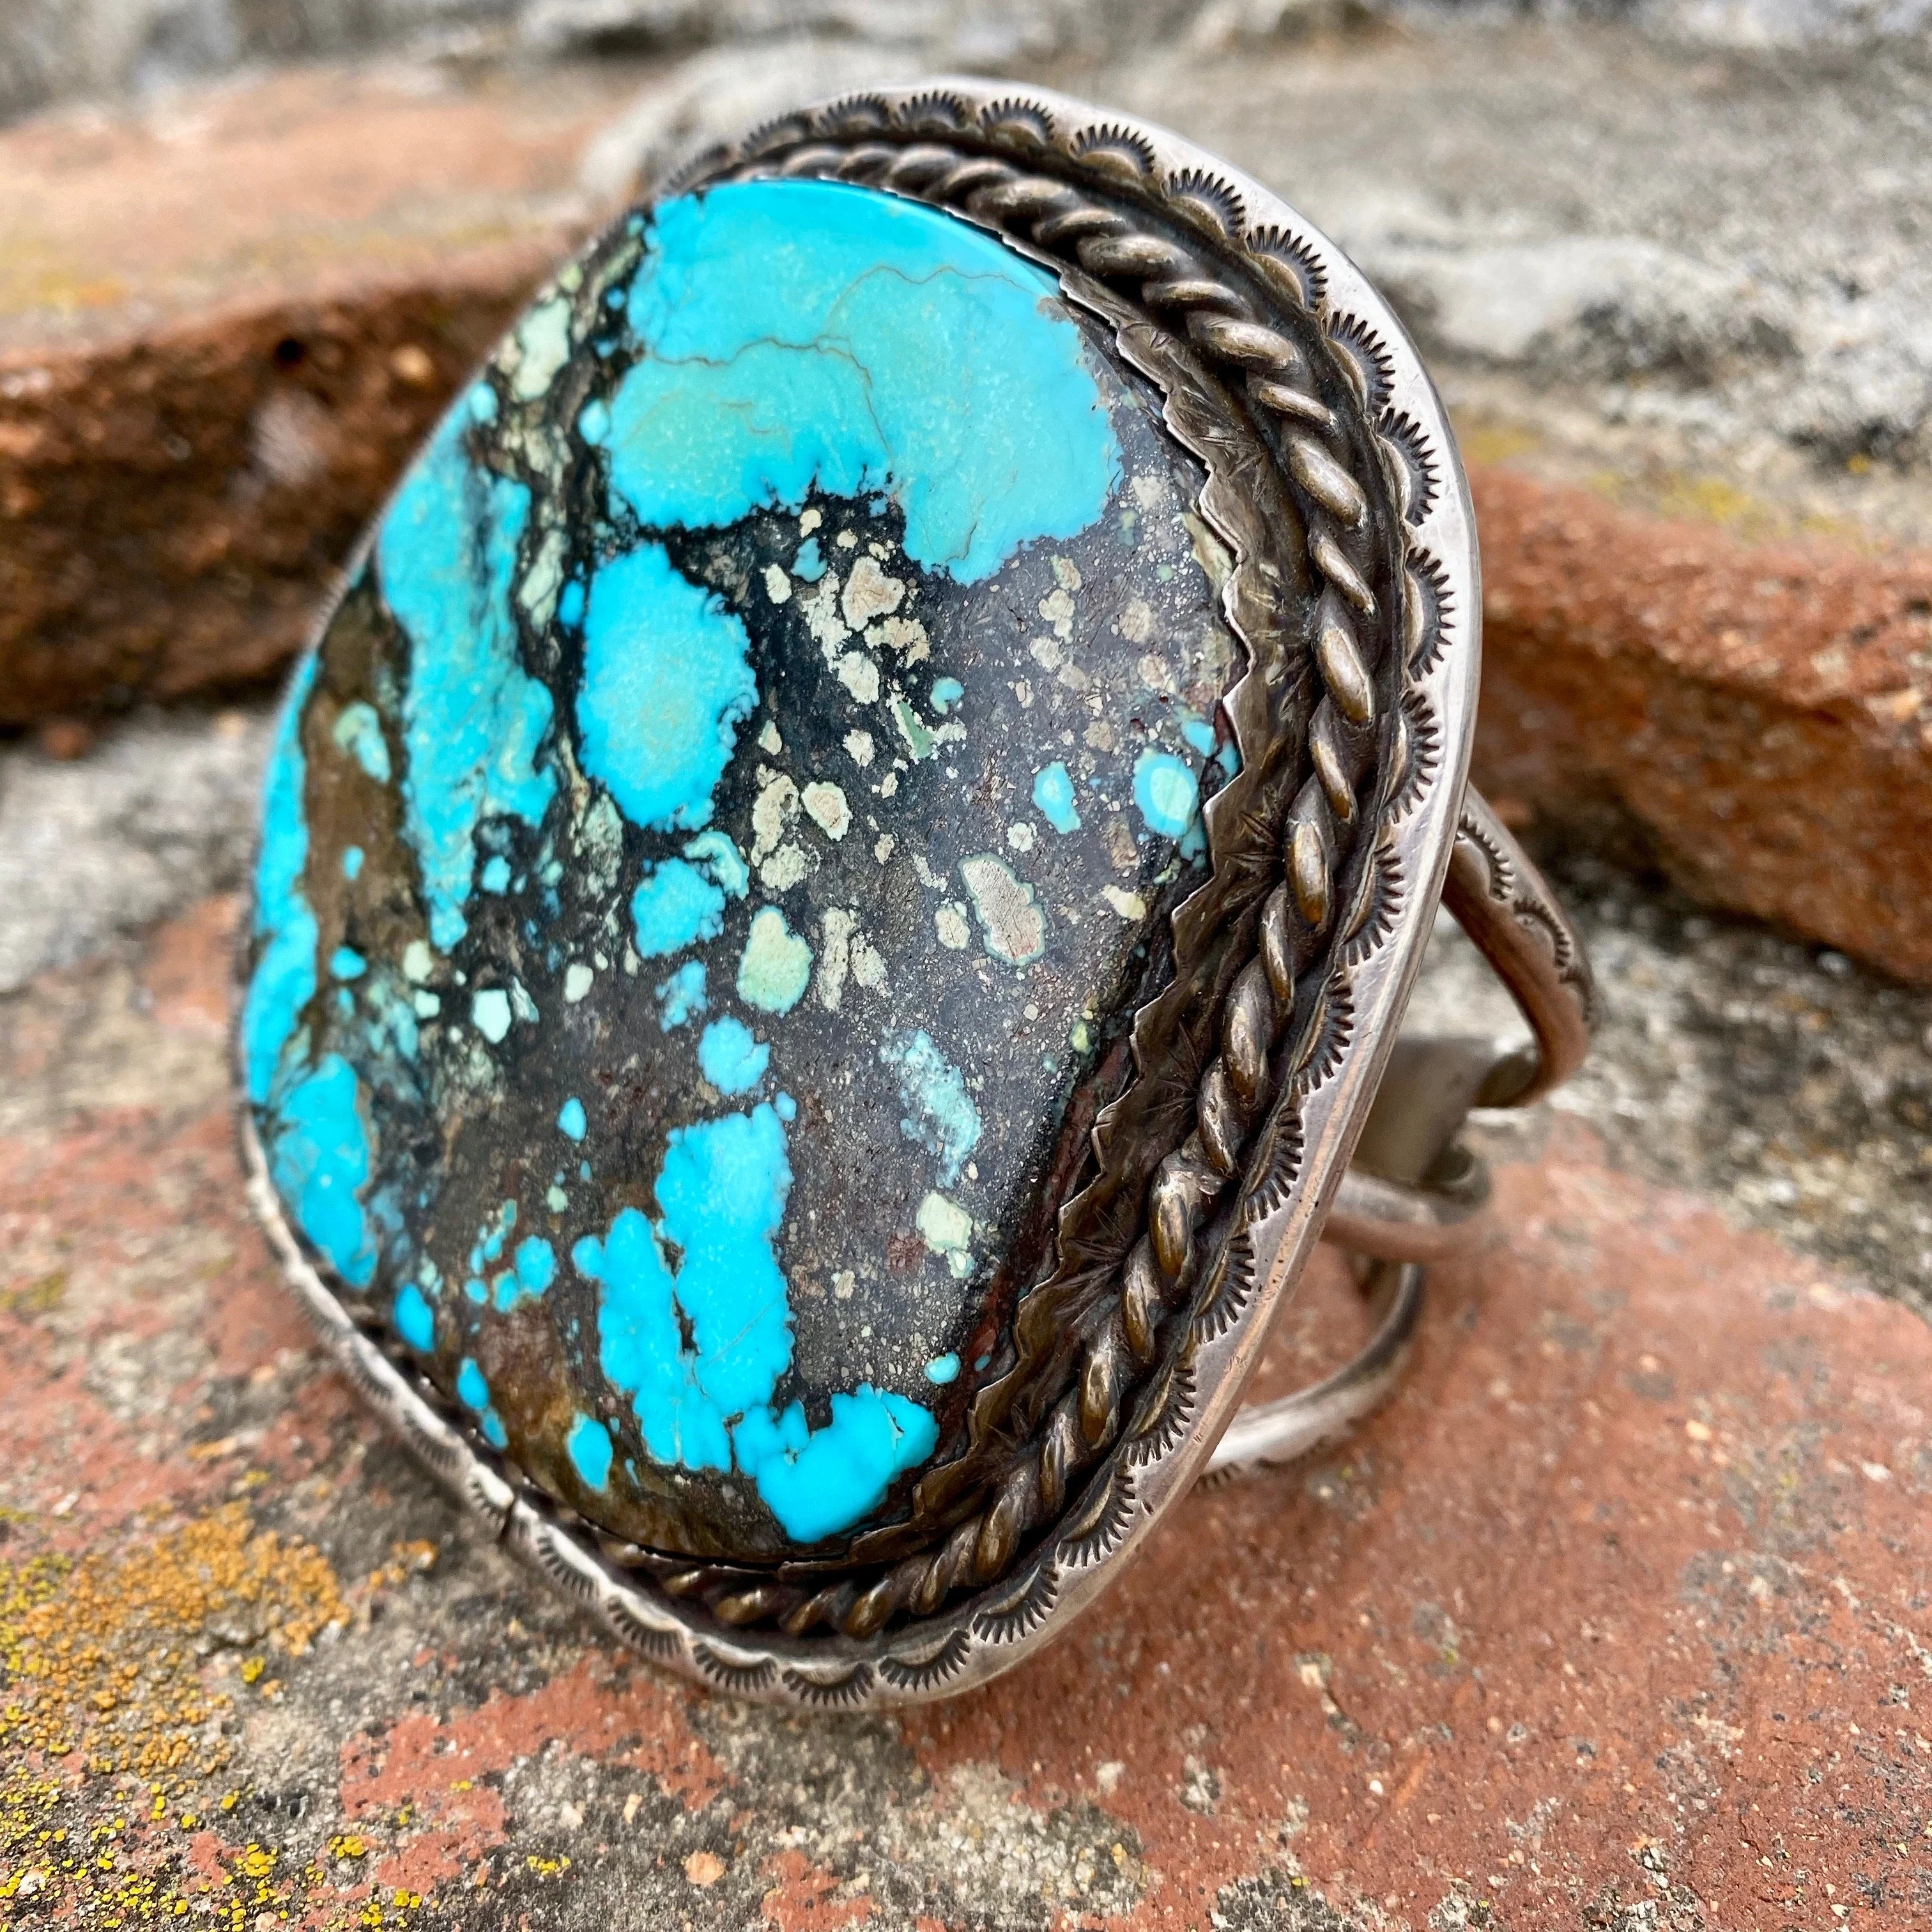 The Monster Navajo Turquoise Cuff Bracelet in Sterling Silver